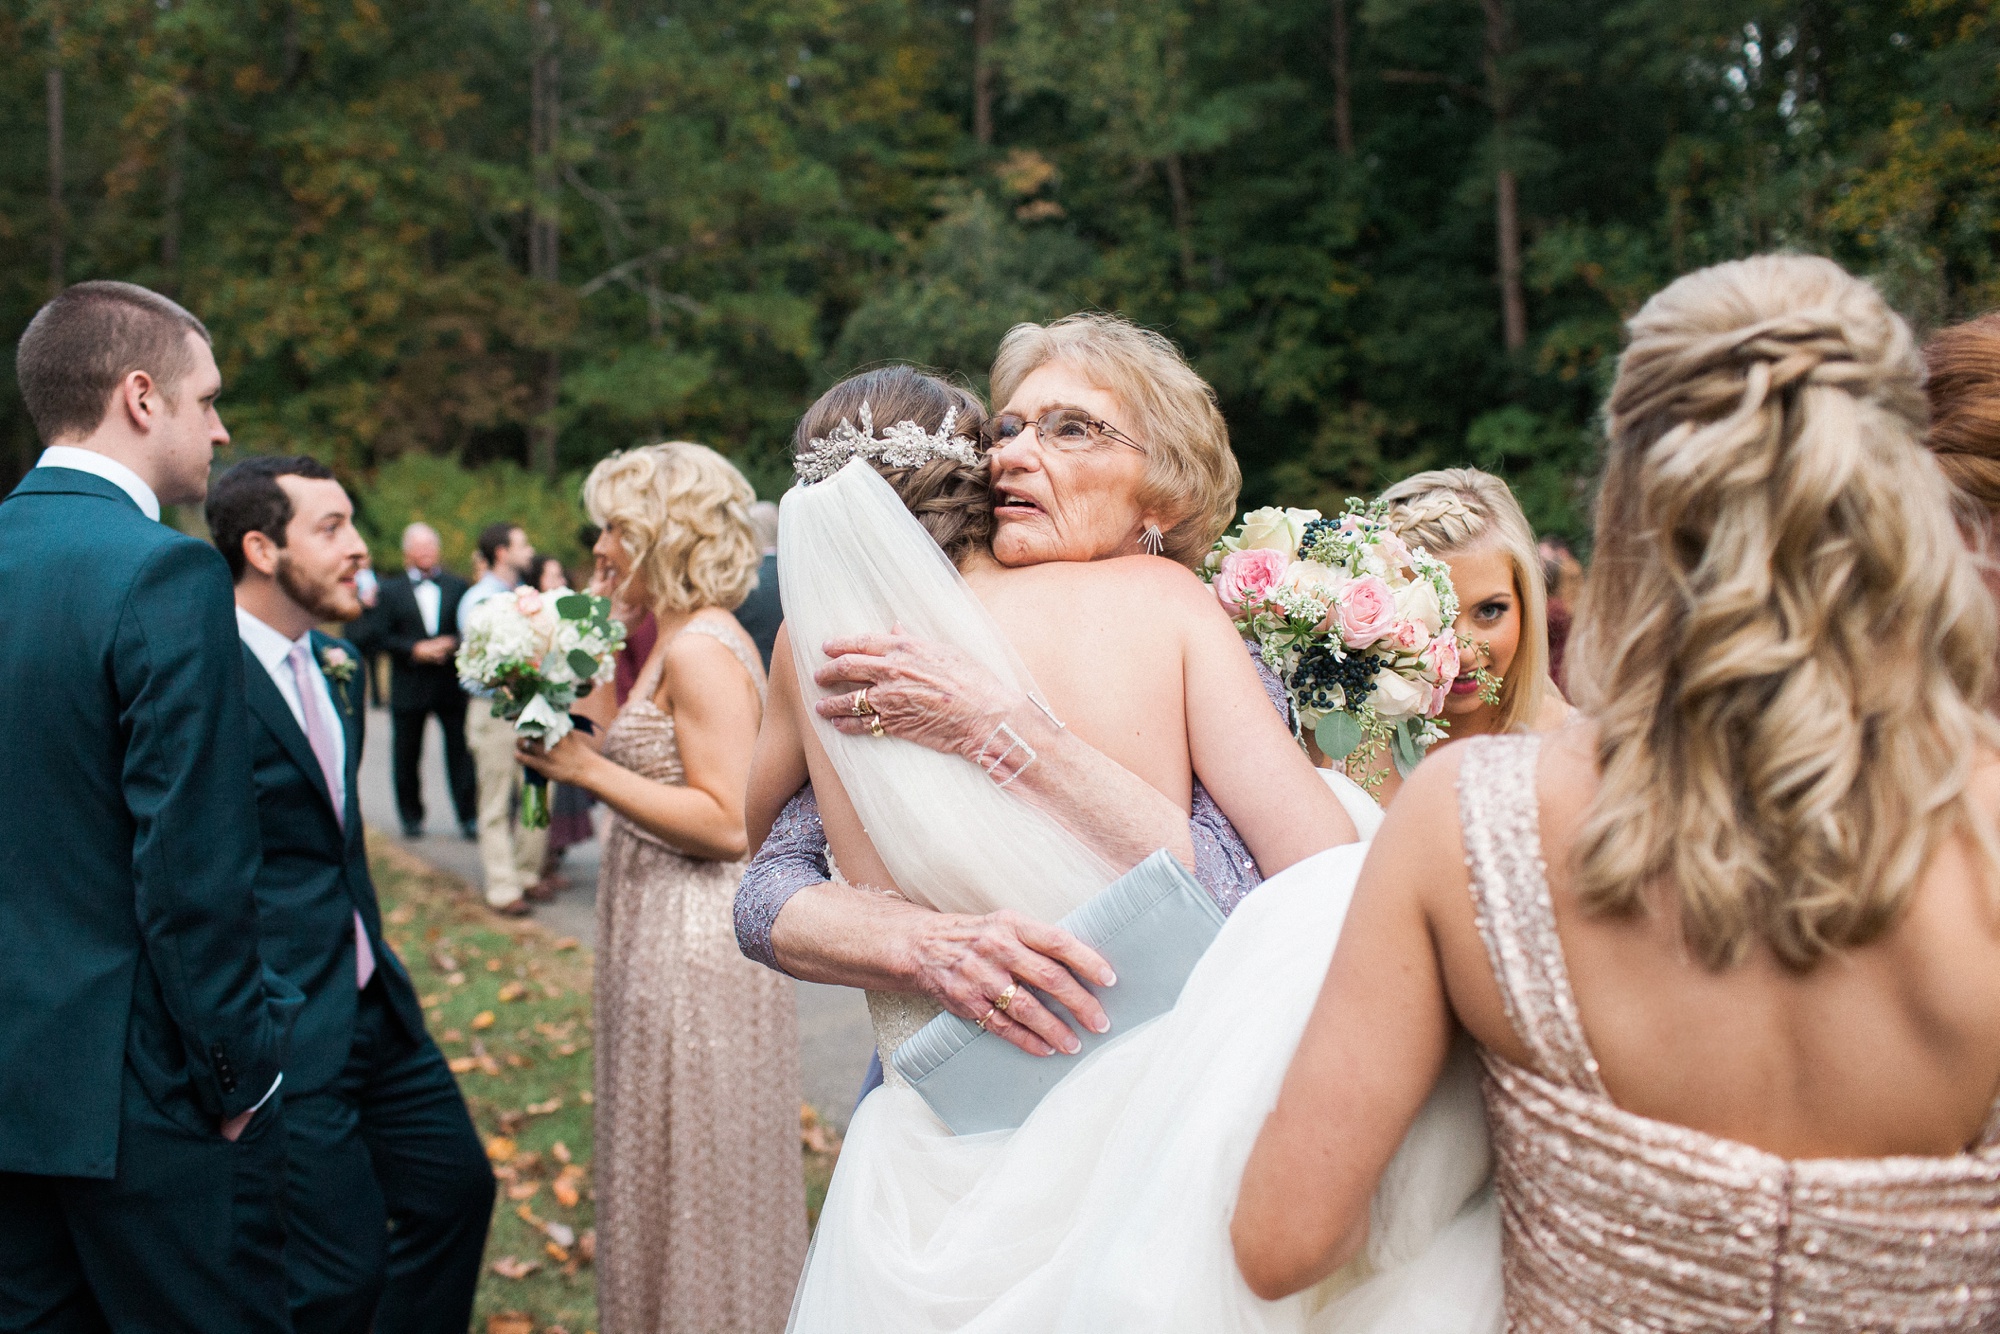 Family embraces bride with warm congratulations!